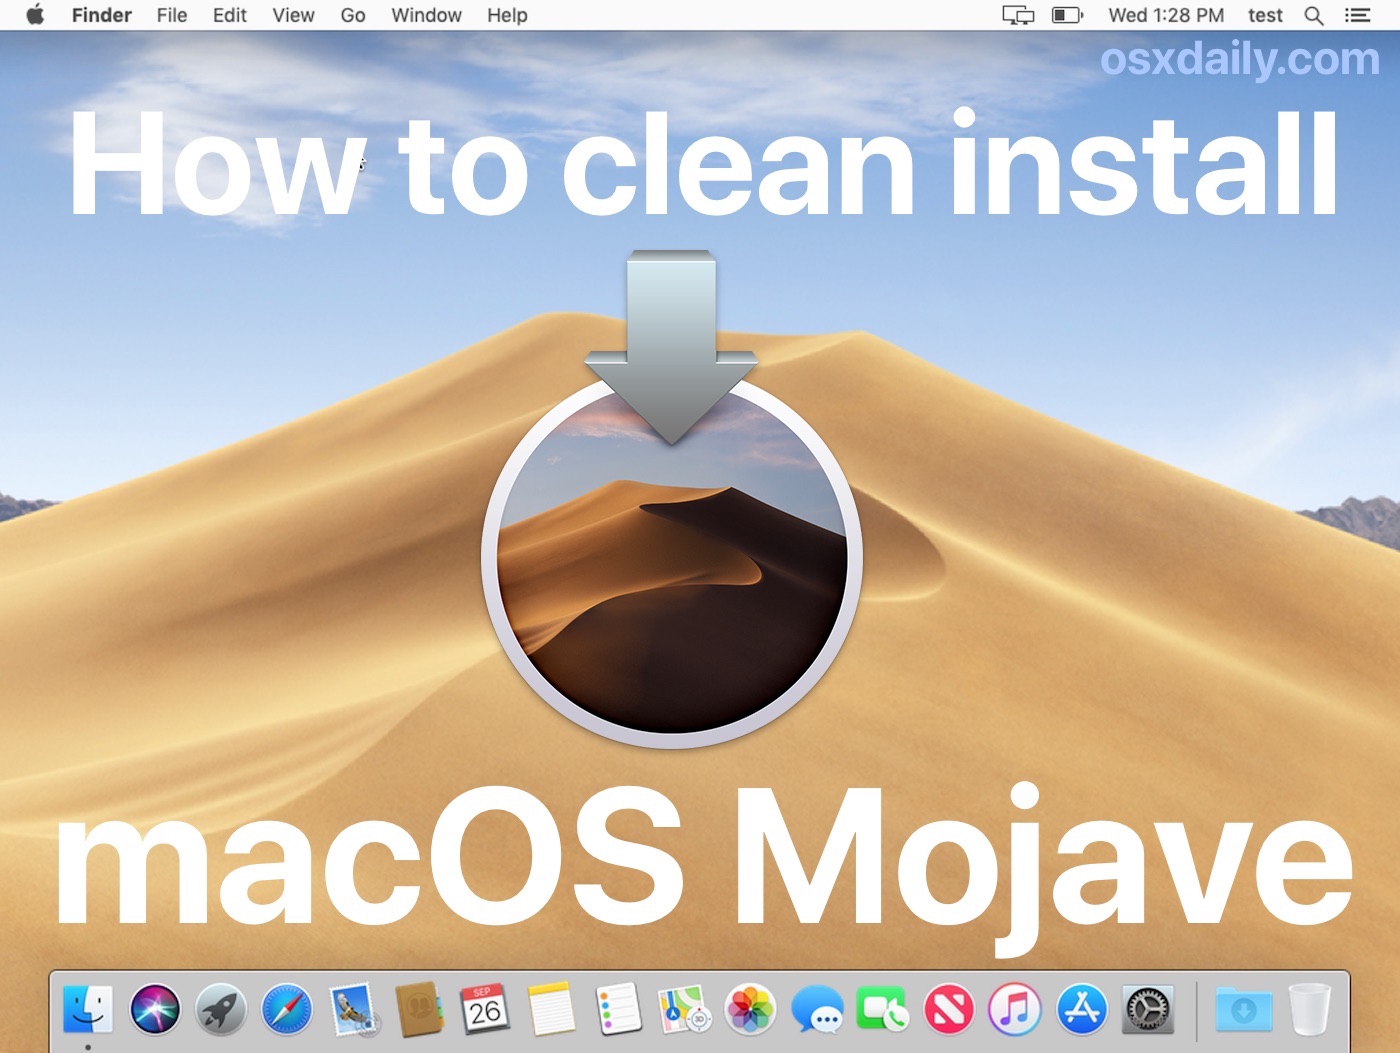 Mojave instal the new